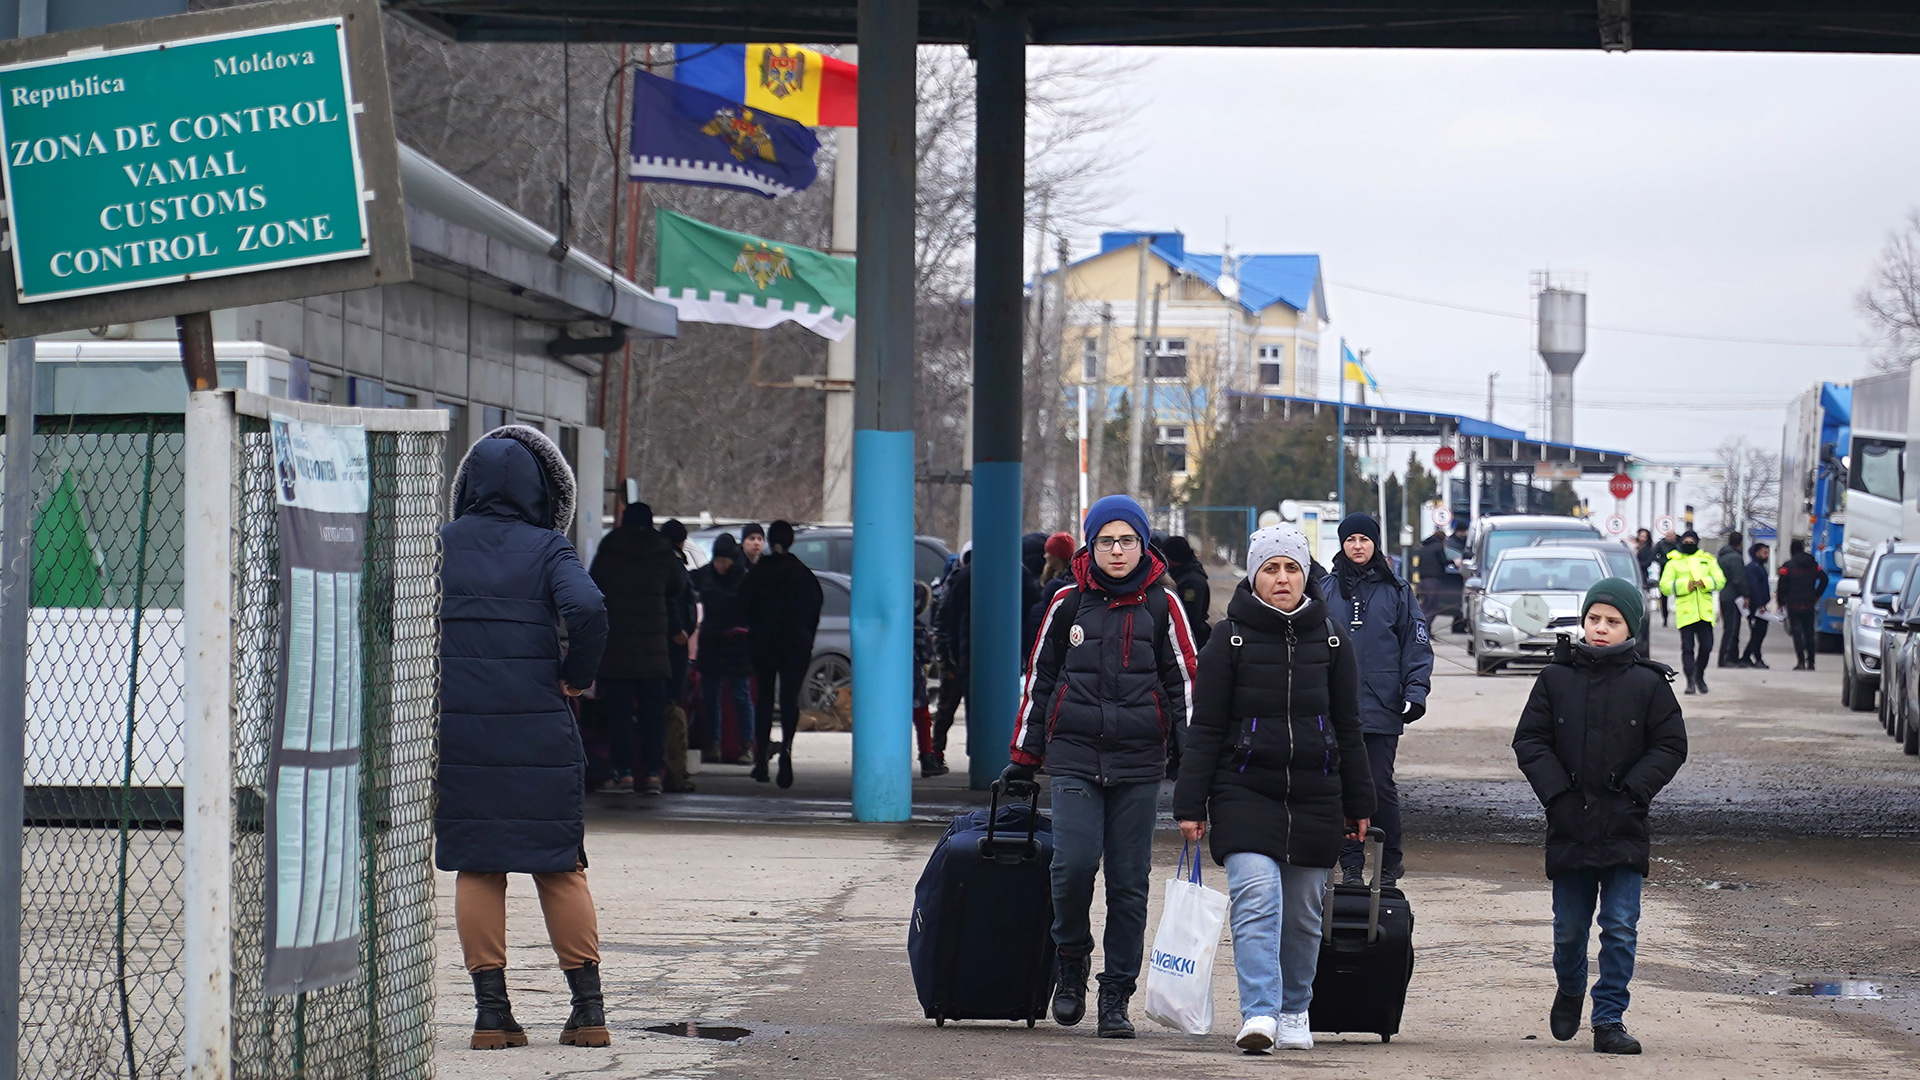 A trio of people, two who carry bags and rolling luggage, walk through a border customs control zone, with other people and vehicles lined up in the background.